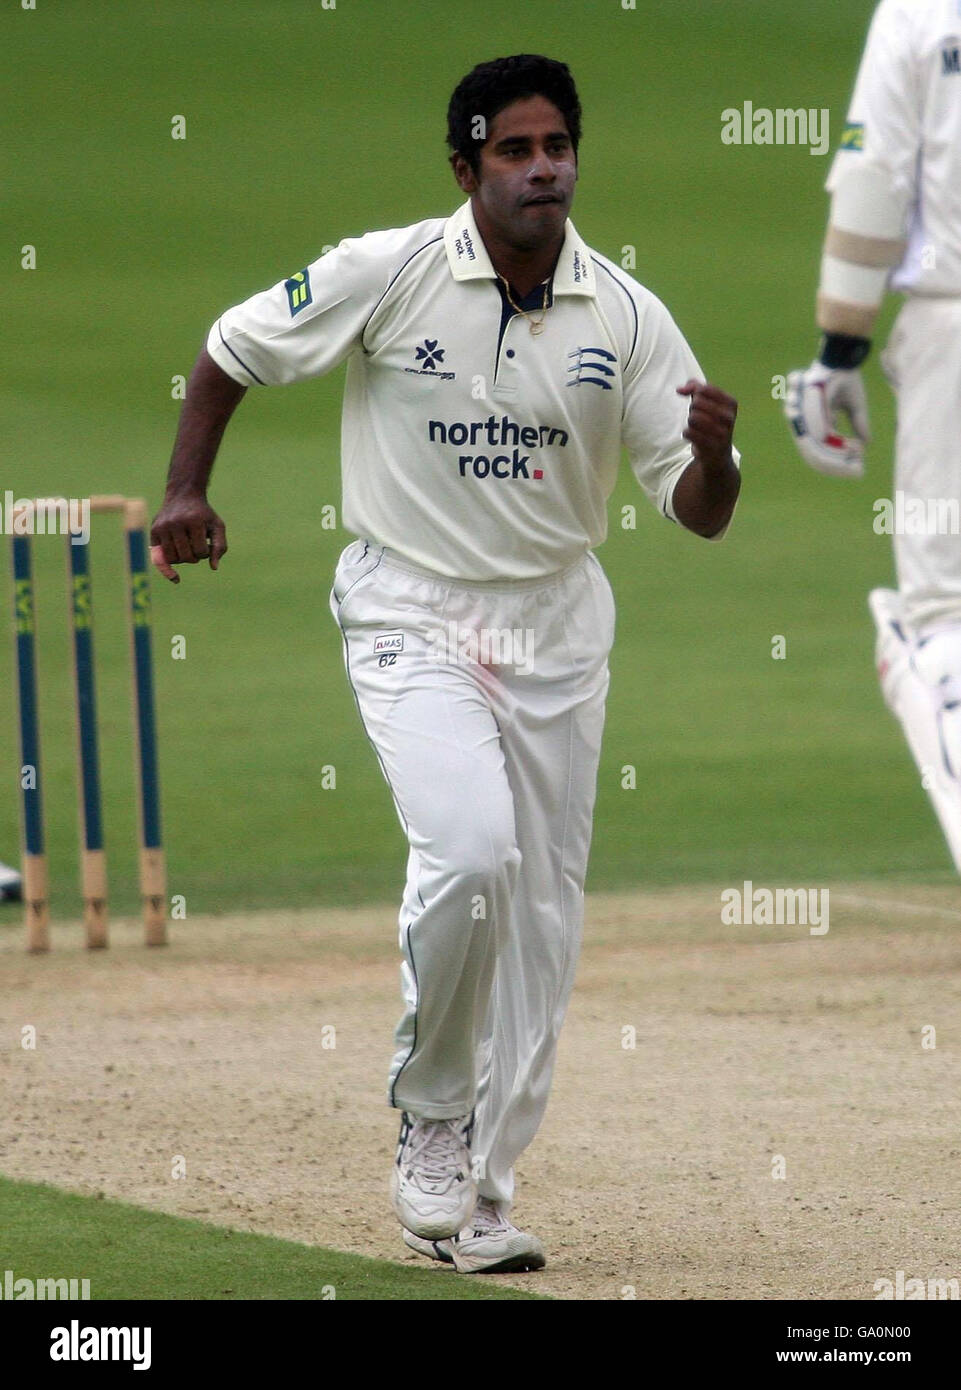 Middlesex's Chaminda Vaas celebrates taking the wicket of Essex's Ryan ten Doeschate during the Liverpool Victoria County Championship Division Two match at Lord's Cricket Ground, St John's Wood, London. Stock Photo